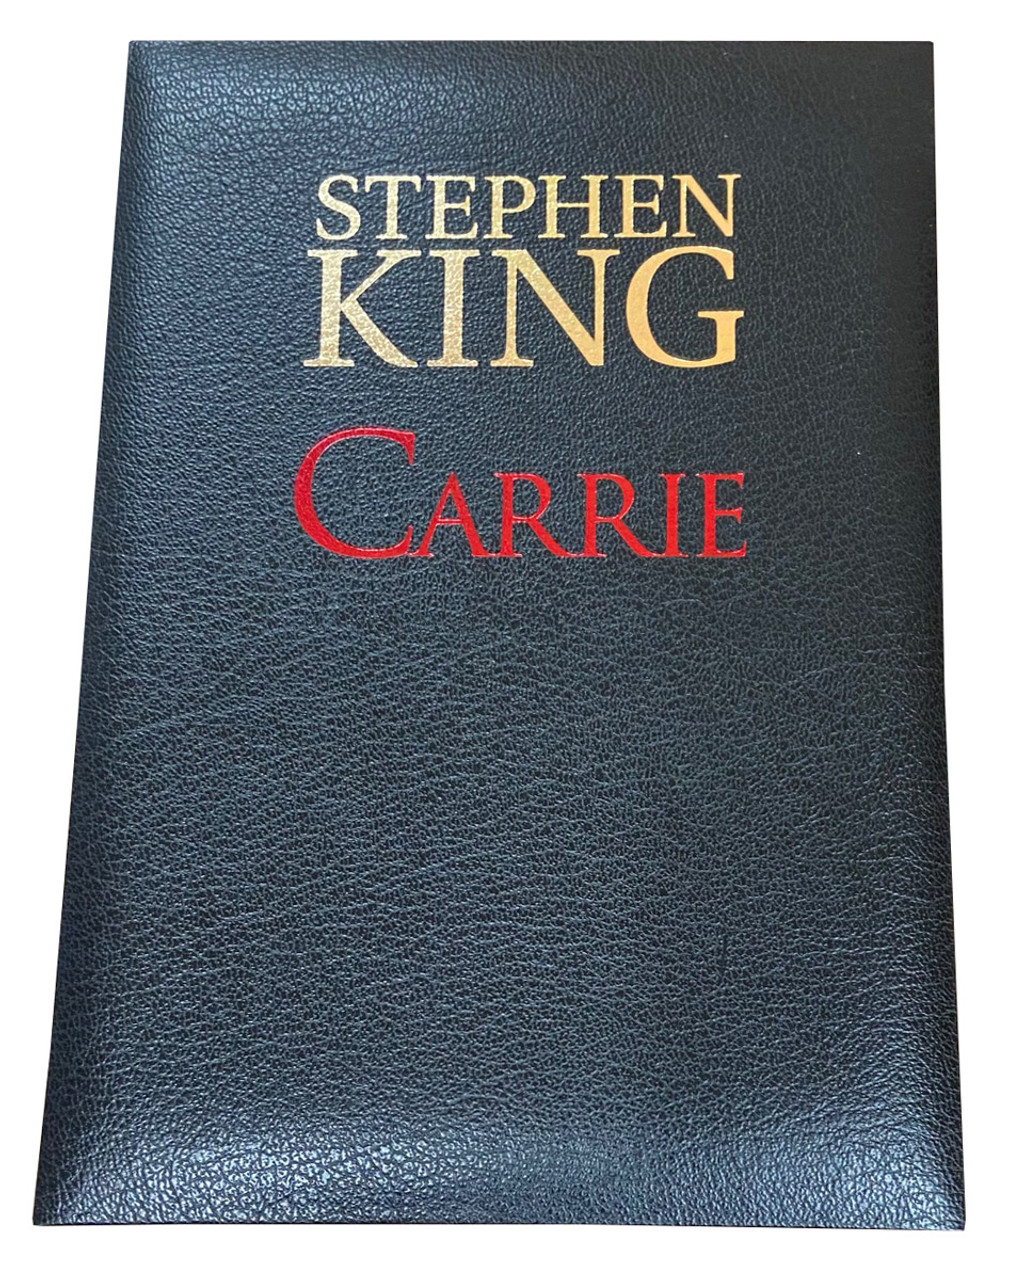 Stephen King, The Doubleday Years “Carrie”, “The Shining”, and “Salem’s Lot” , "Night Shift" Signed Lettered Artist Edition 4-Volume Matching “PC” Set of 52, Remarqued [Very Fine]